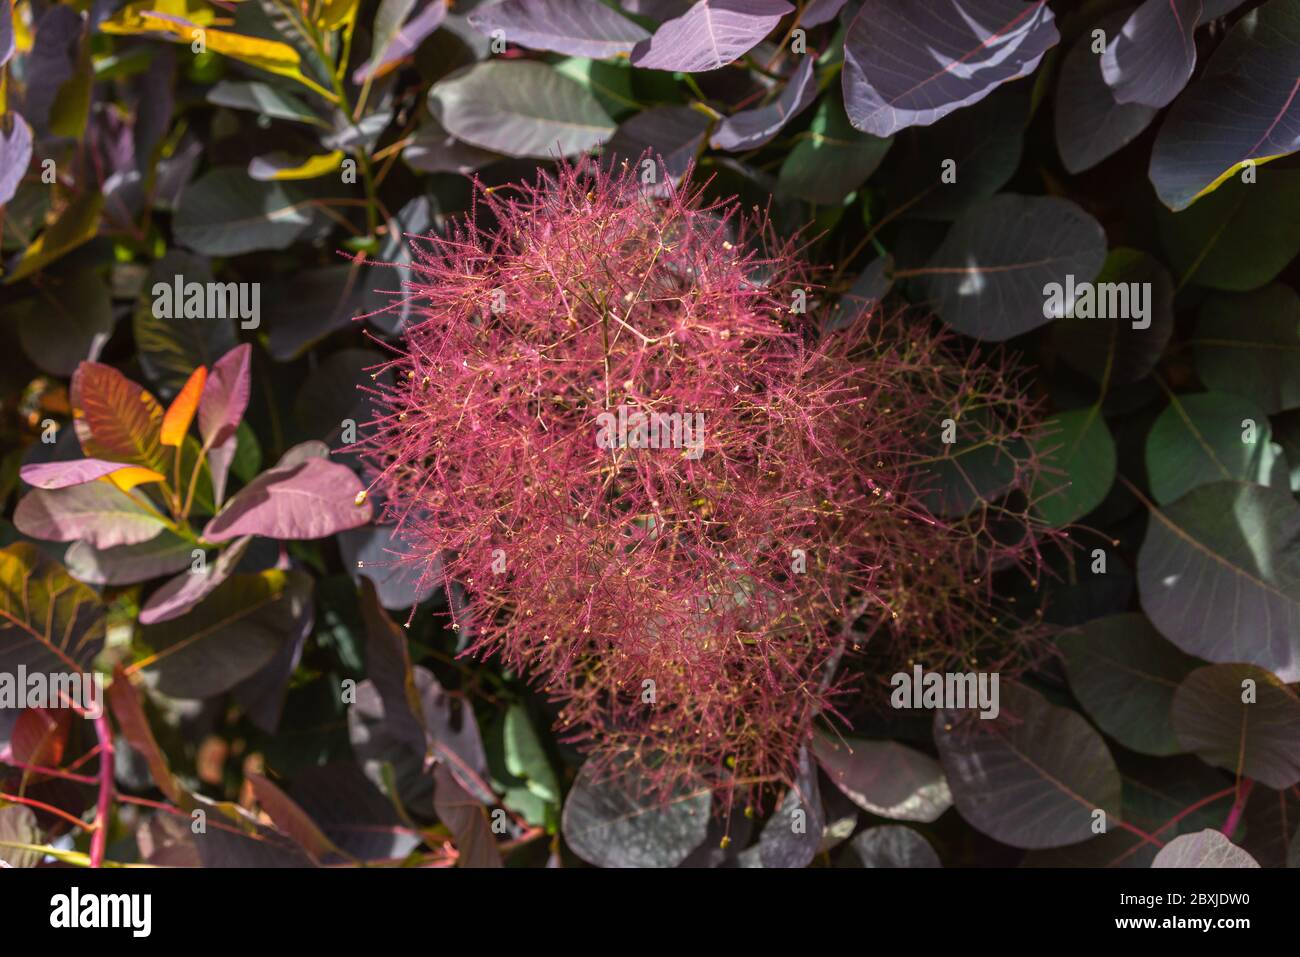 Leaves and flowers of a Cotinus coggygria - Purple Smoke Bush during Spring in a garden in Southern England, UK Stock Photo